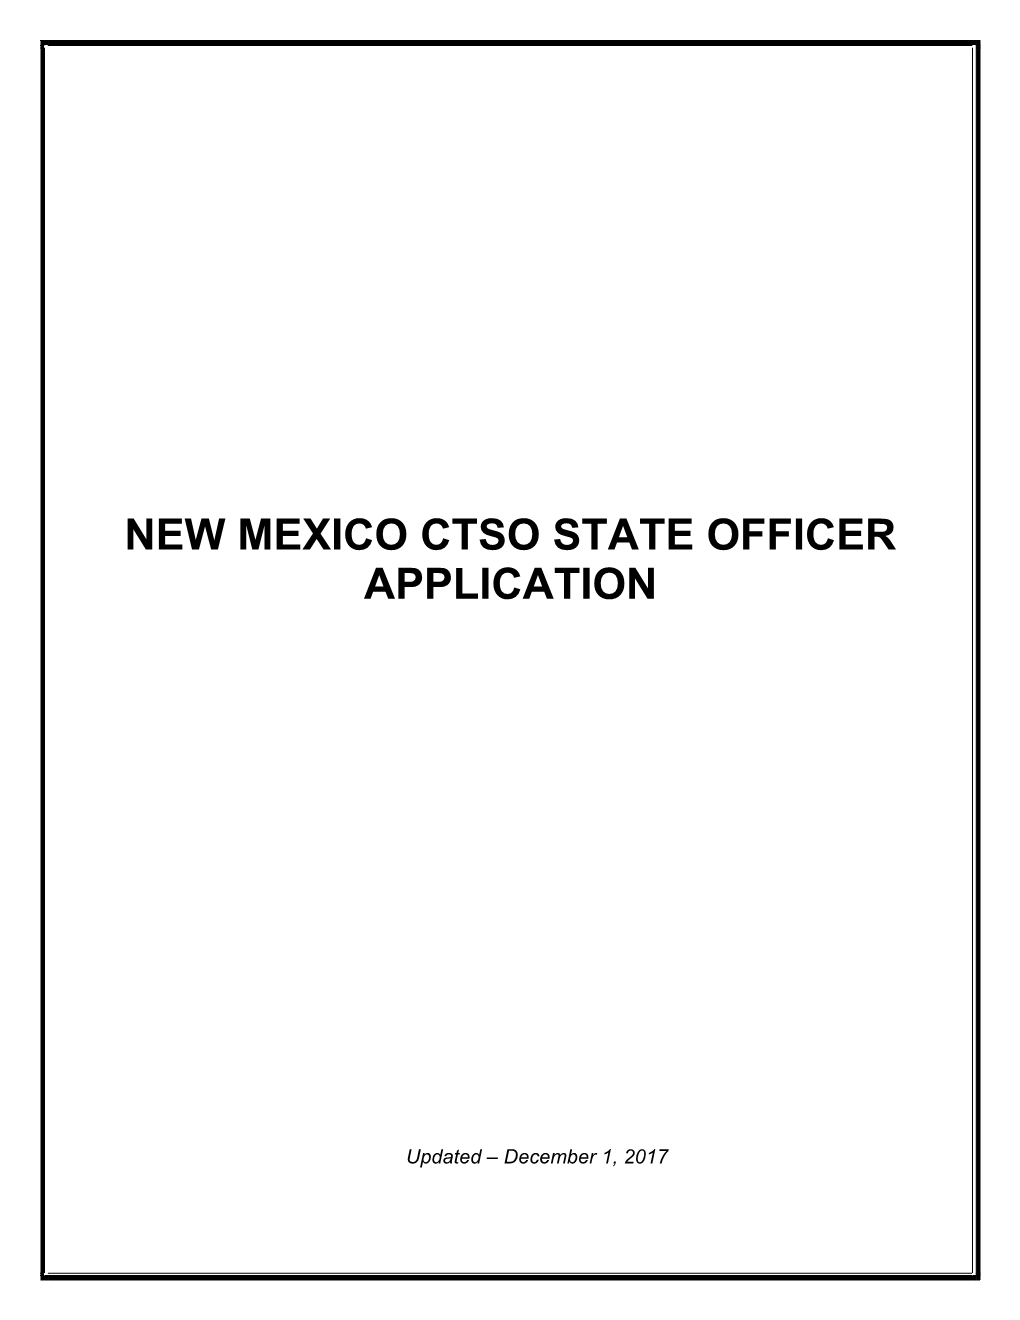 New Mexico Ctso State Officer Application